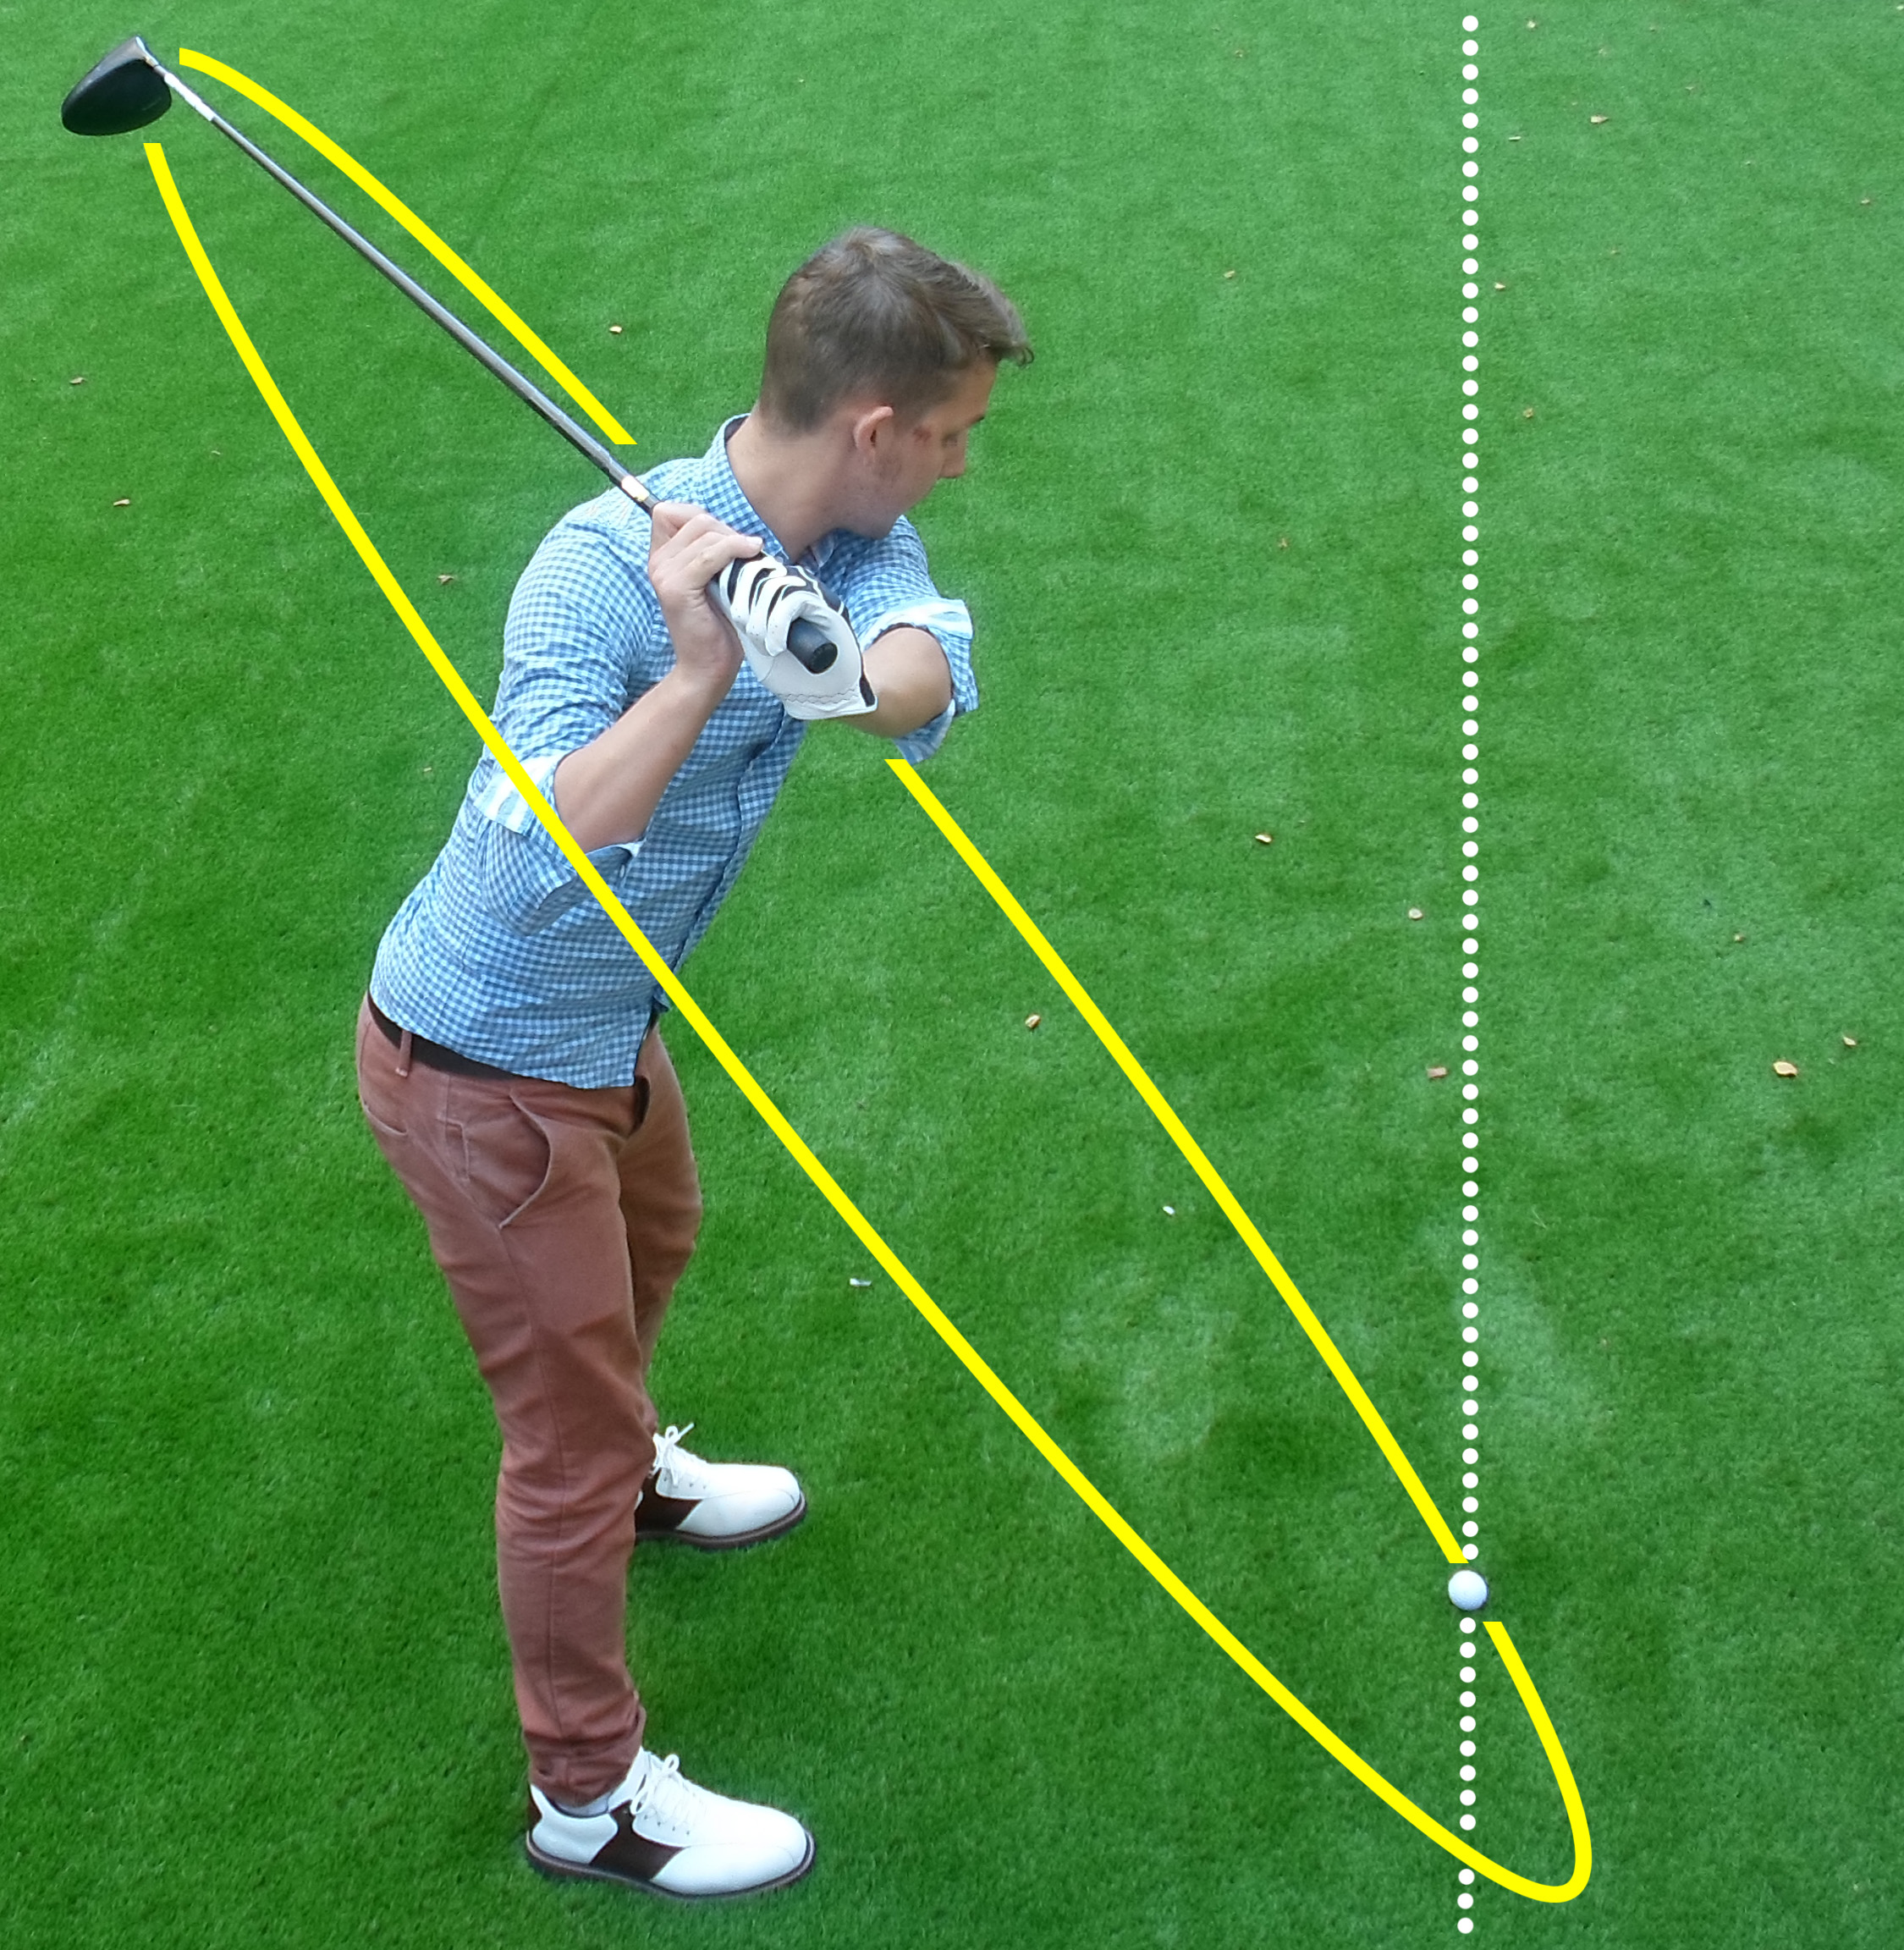 Fig.2 - To hit a fade your swing path should travel from outside the target line then hit across the ball (click to enlarge)